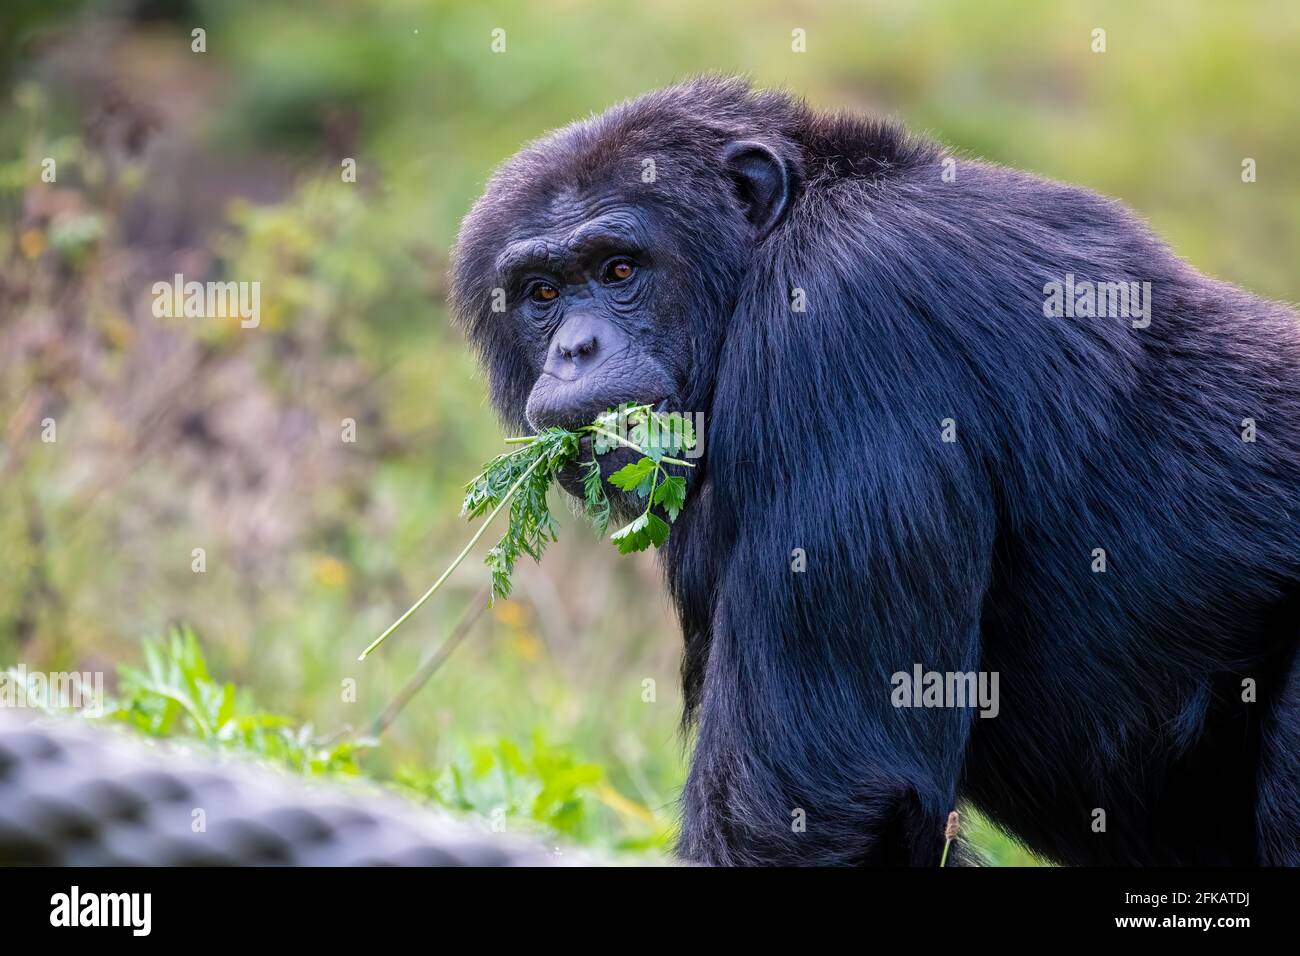 A monkey  chewing a fresh parsley and eating .Background yellow green leaves. Stock Photo